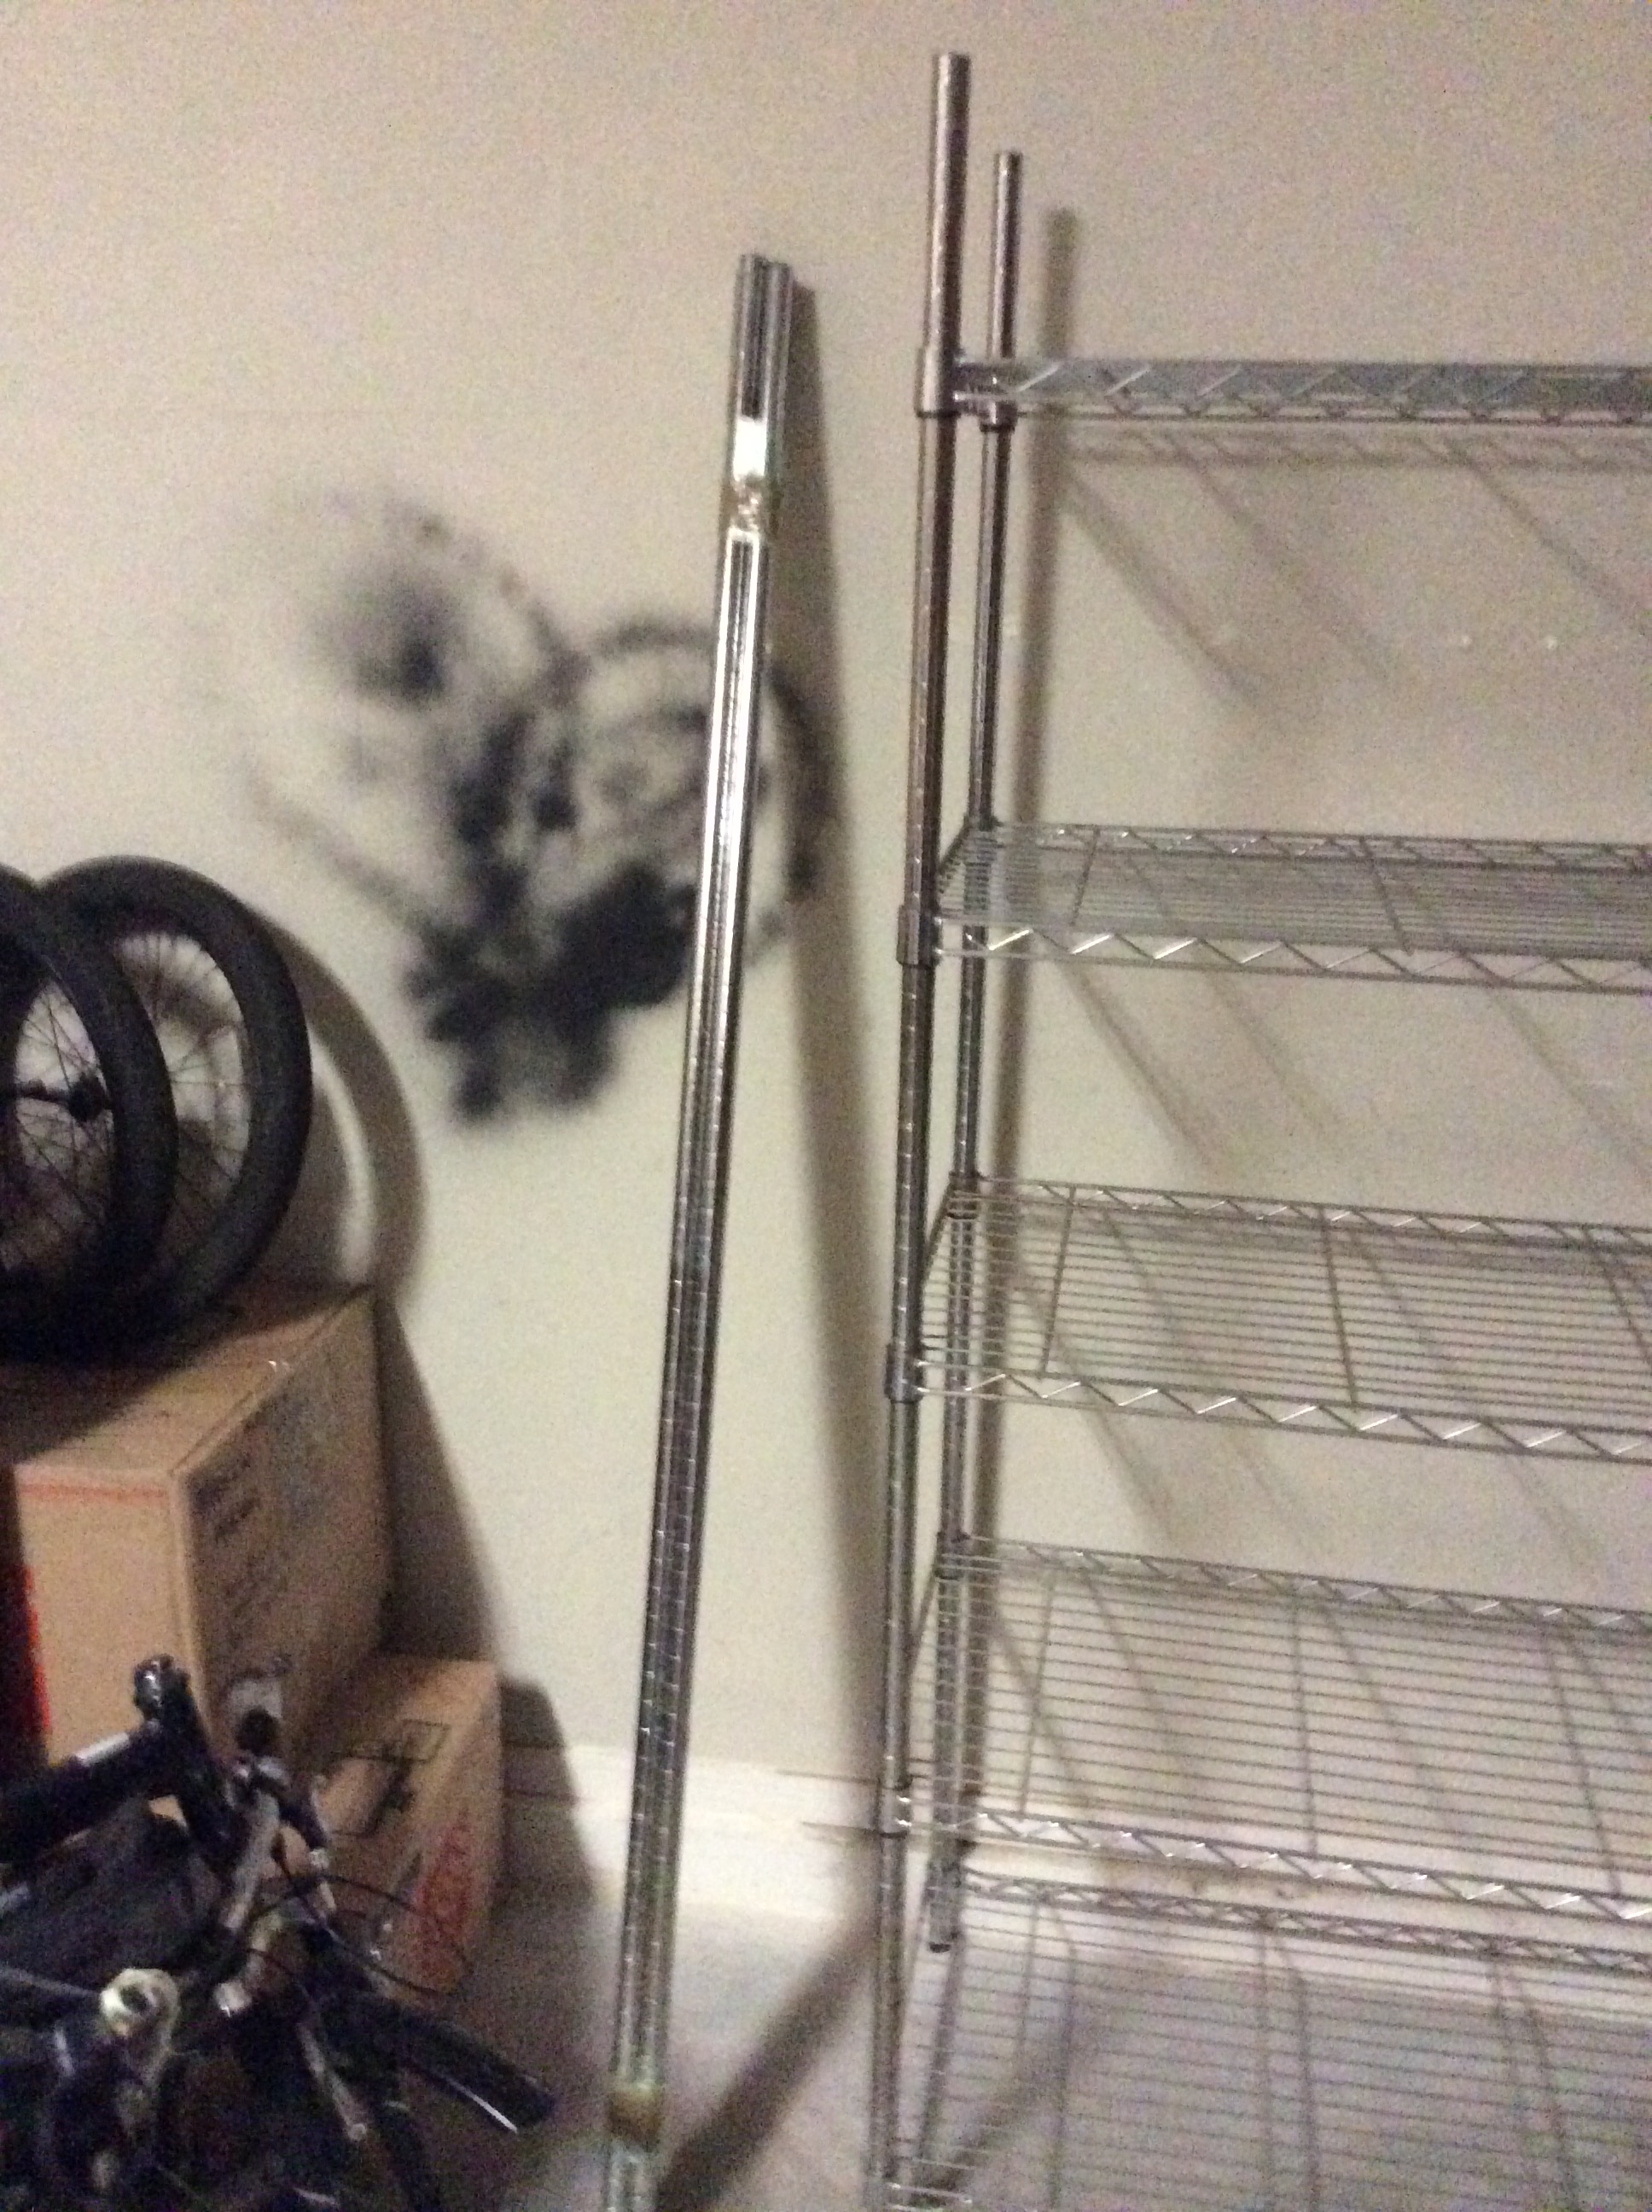 We received the poles for two shelving units but only got the shelves for one setup.